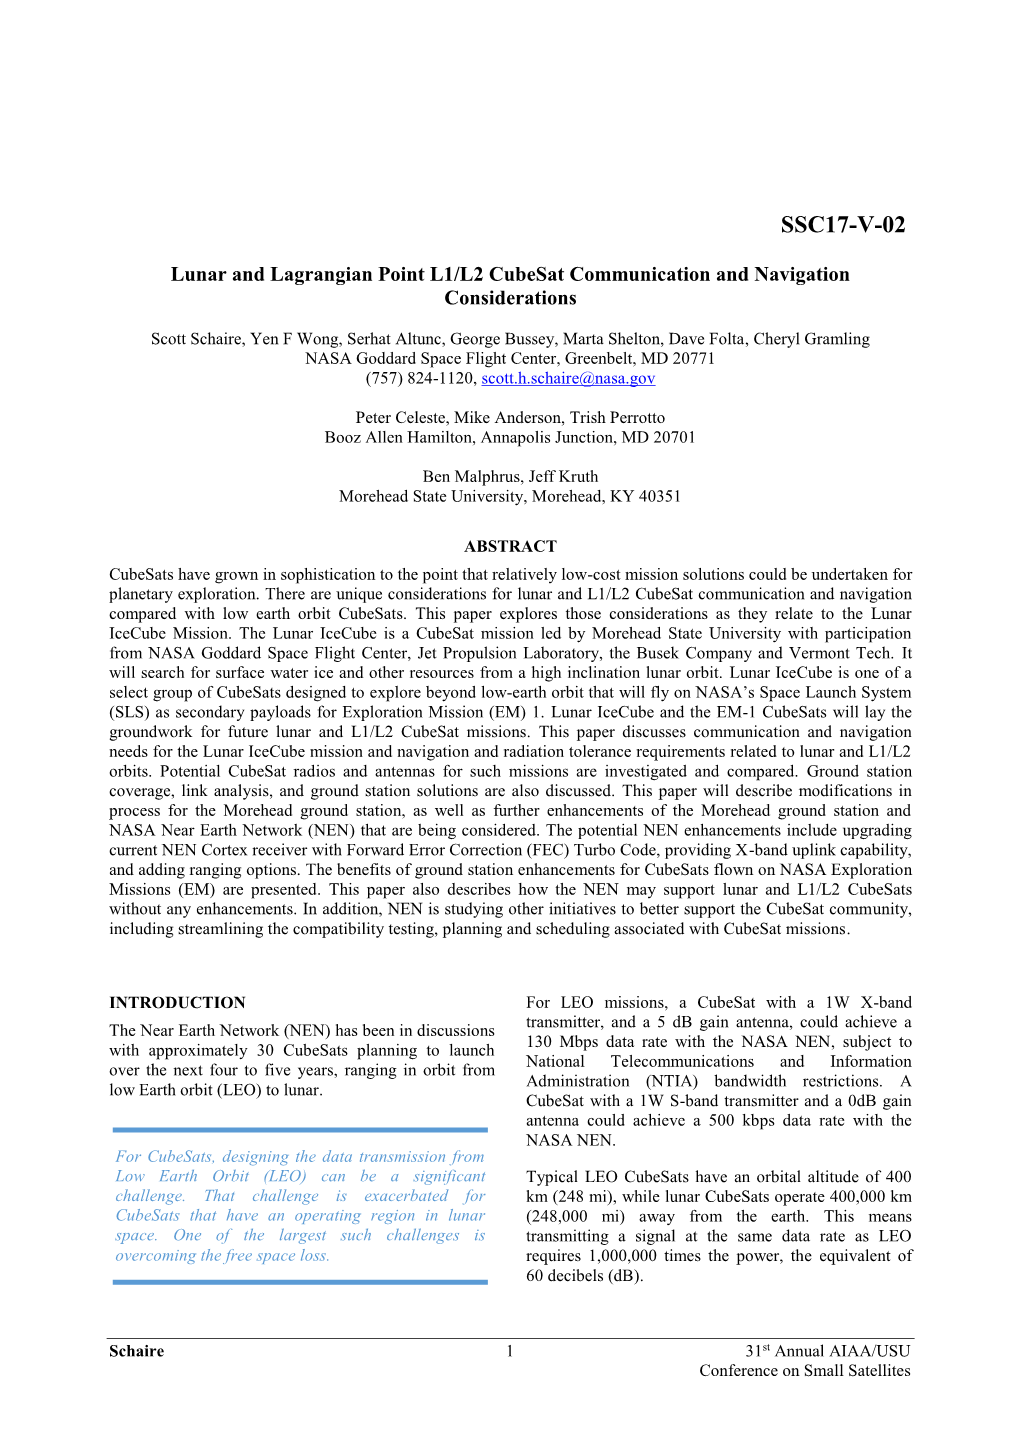 Lunar and Lagrangian Point L1/L2 Cubesat Communication and Navigation Considerations